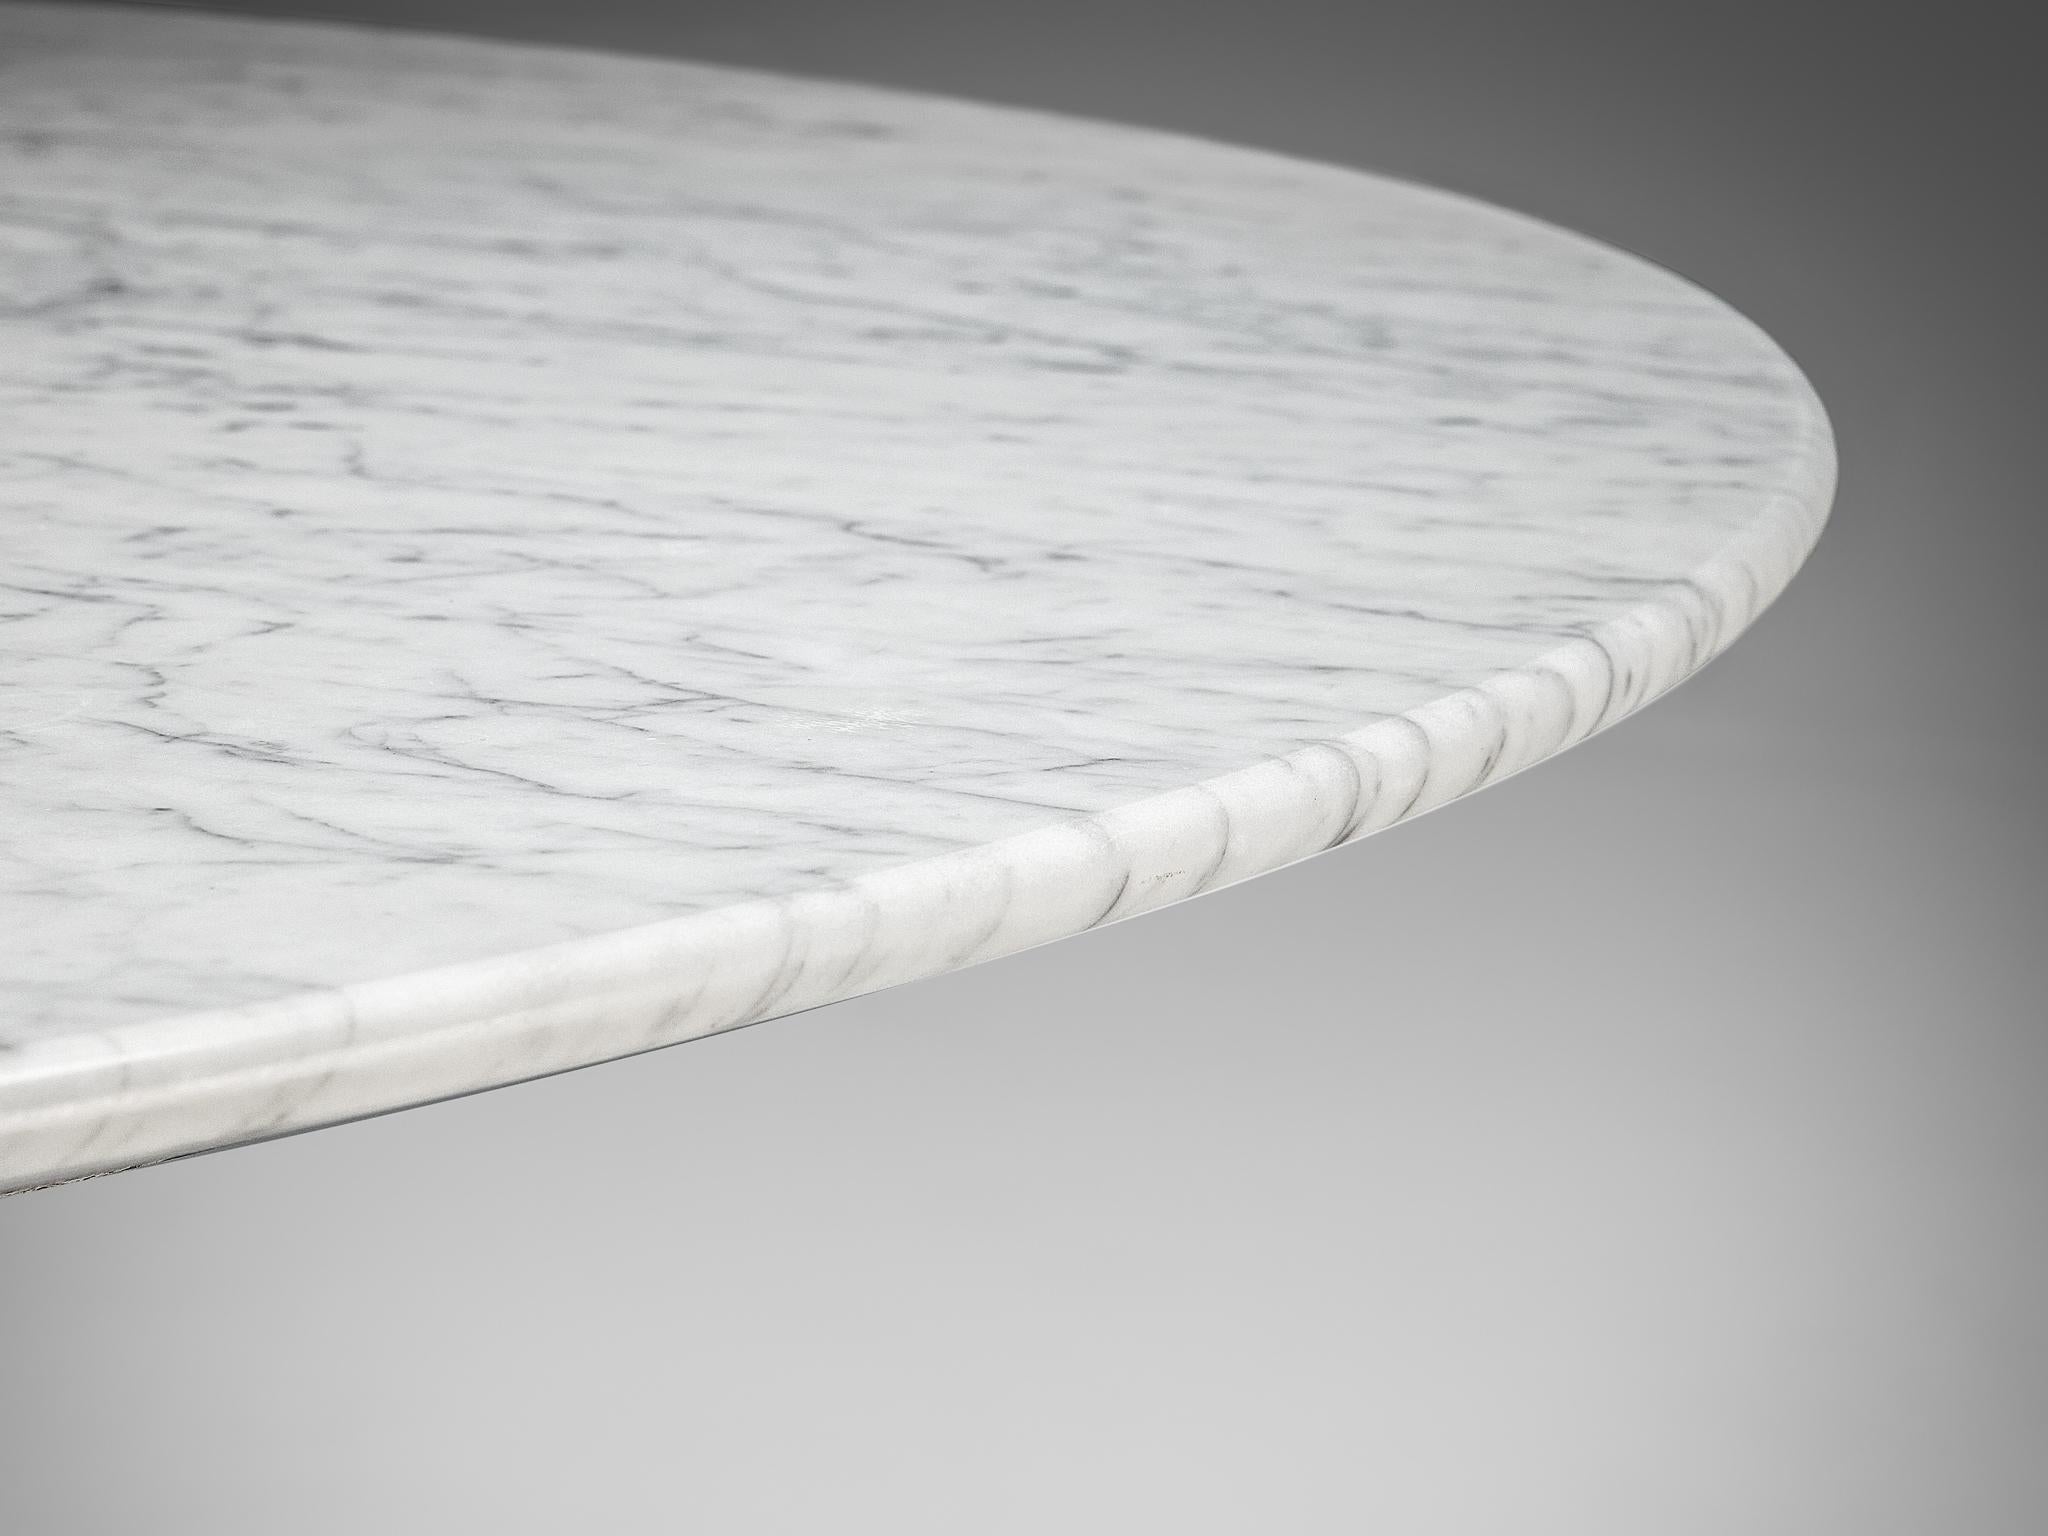 Eero Saarinen for Knoll 'Tulip' Dining Table with Carrara Marble Top  For Sale 2